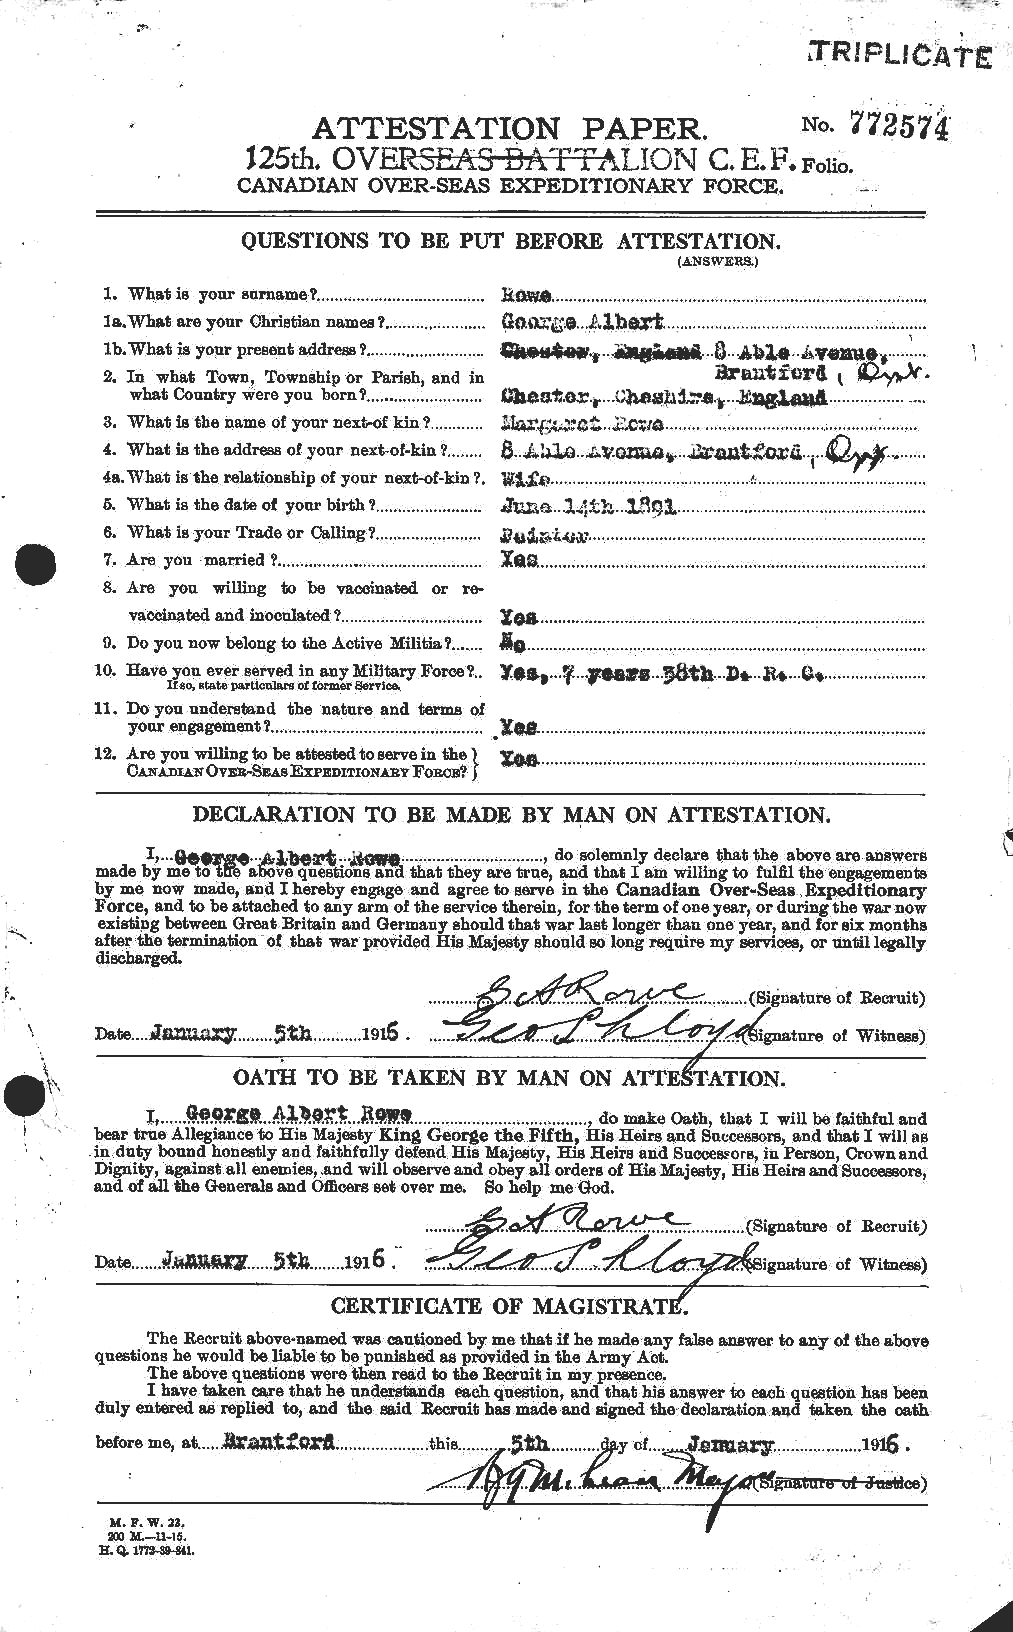 Personnel Records of the First World War - CEF 615877a